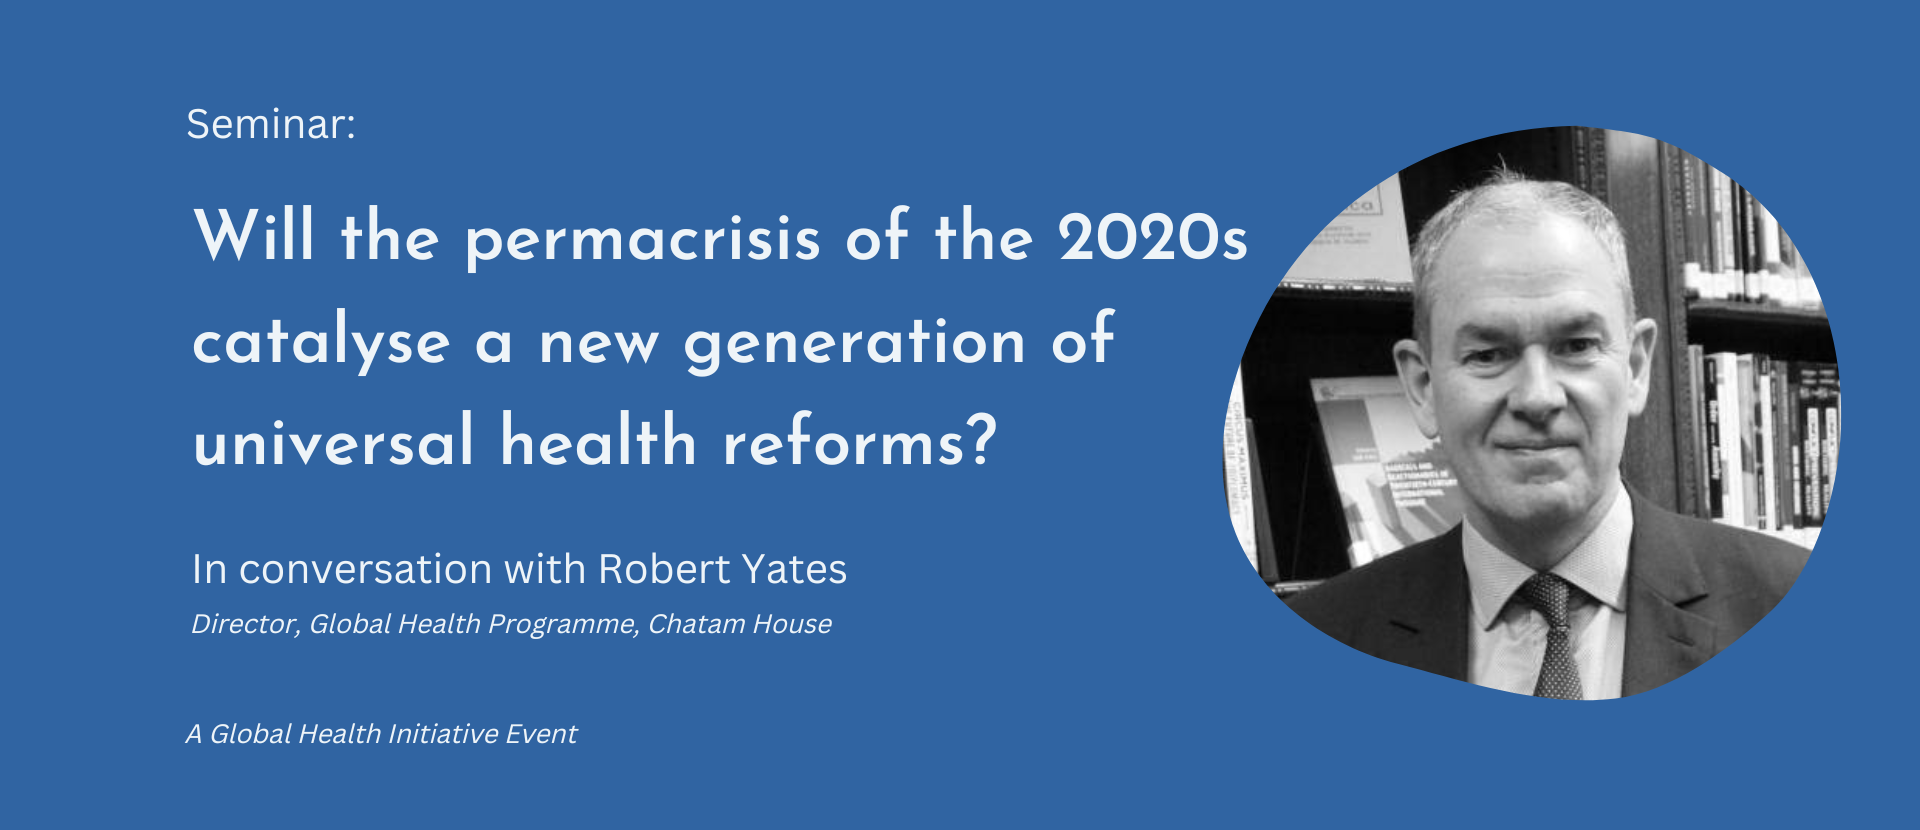 Rob Yates_Will the permacrisis of the 2020s catalyse a new generation of universal health reforms